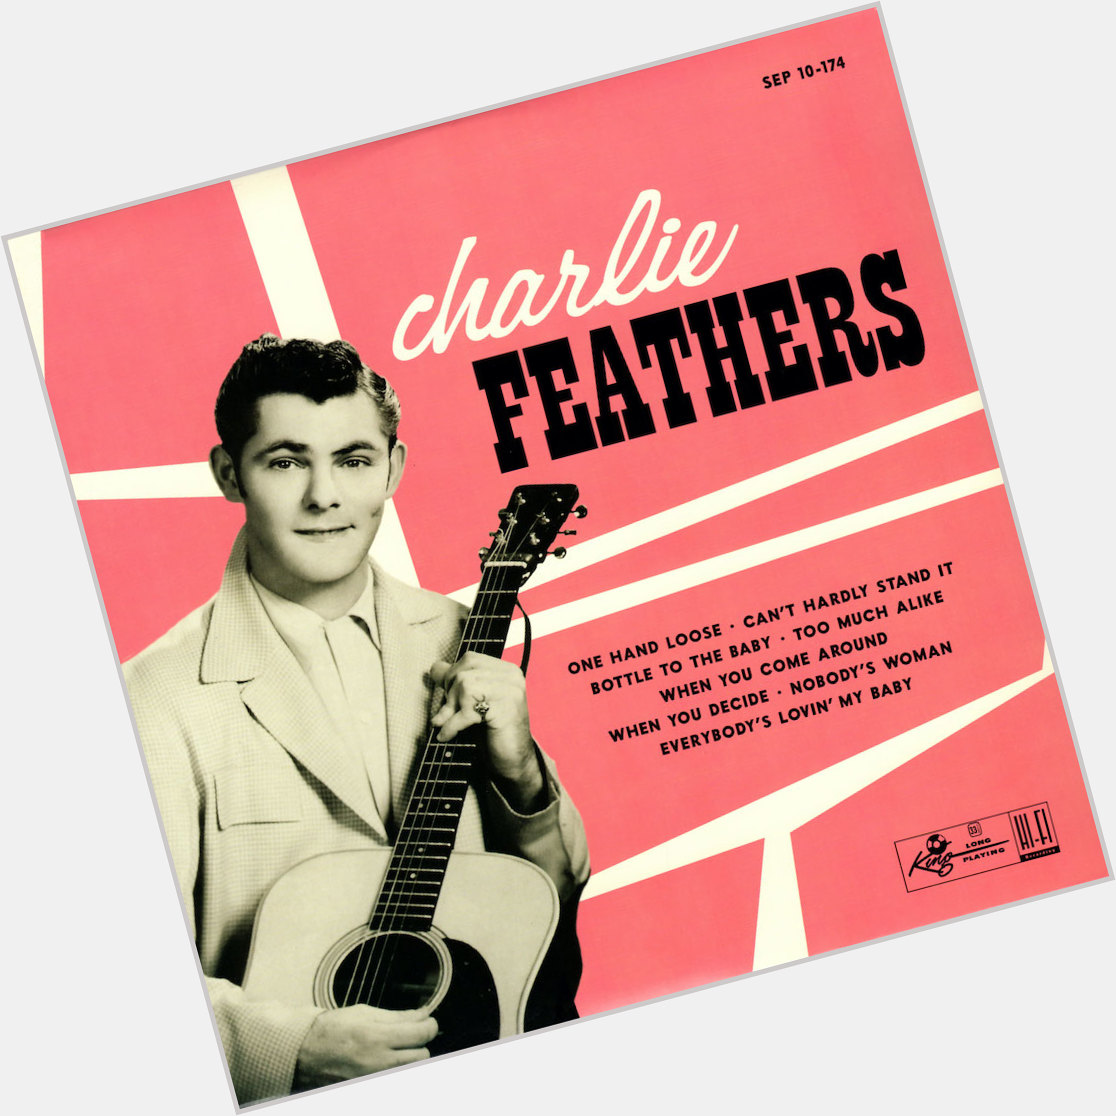 Https://fanpagepress.net/m/C/Charlie Feathers New Pic 3